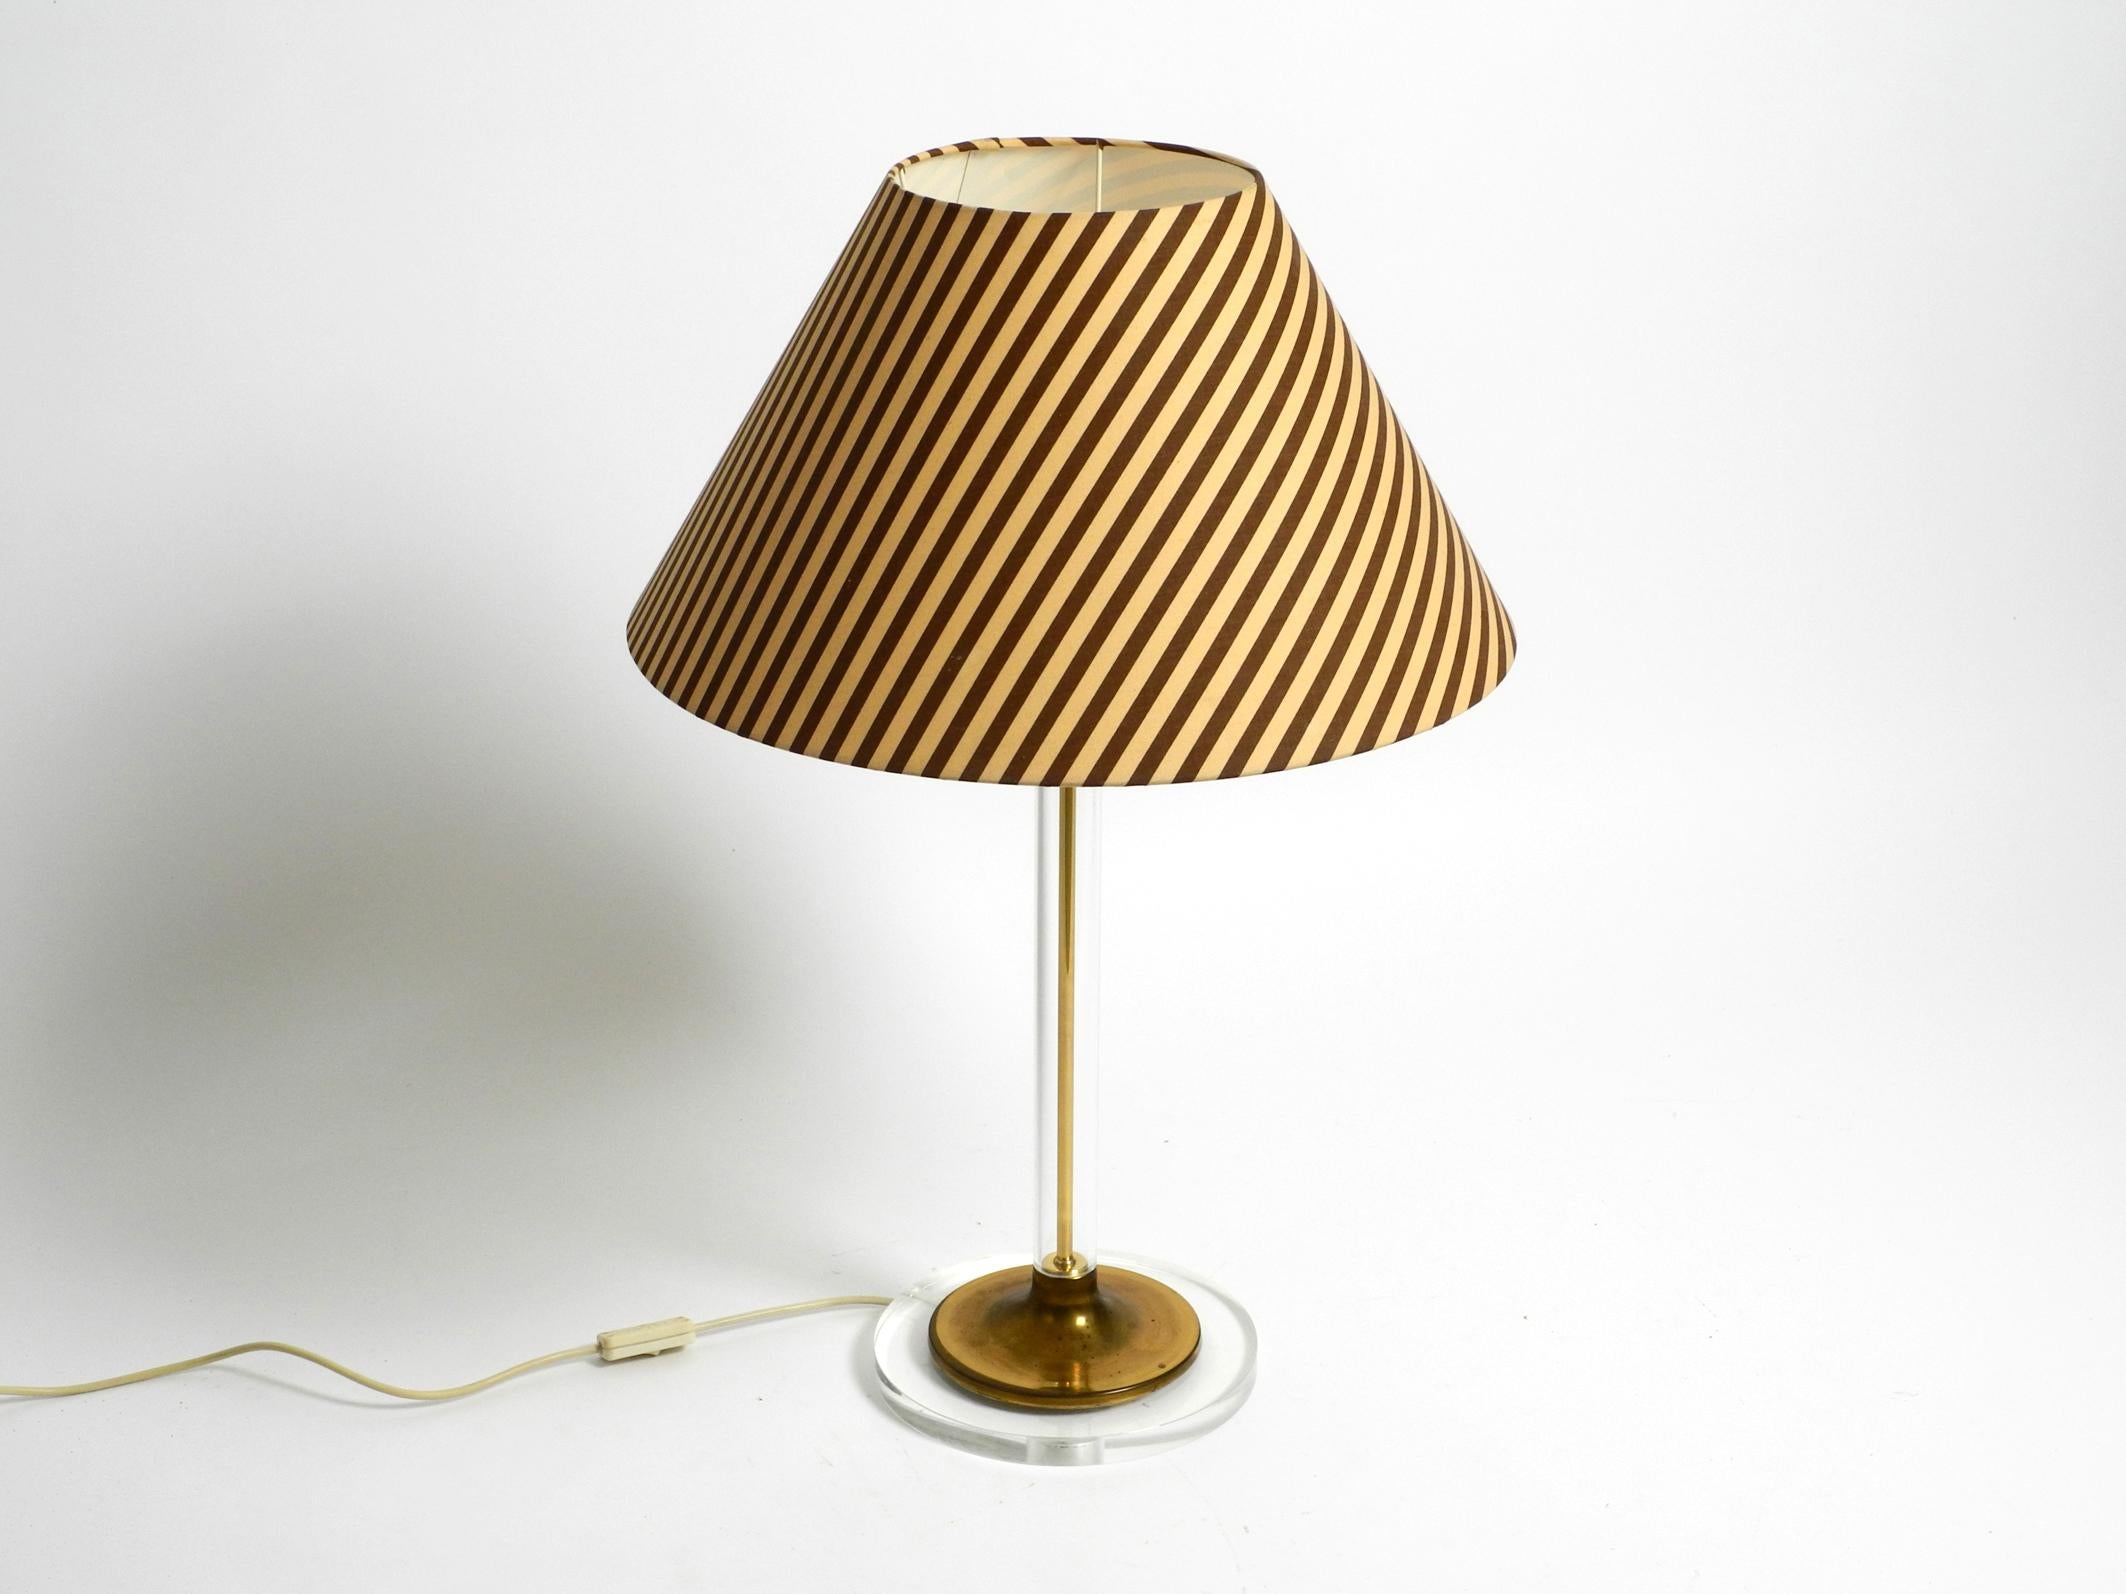 Very rare large table lamp from the 70s made of plexiglass and brass.
Made by the Vereinigten Werkstätten. Made in Germany.
Very high quality minimalistic design. 
Base and neck are made of solid plexiglass. 
The cover on the base and the rod inside